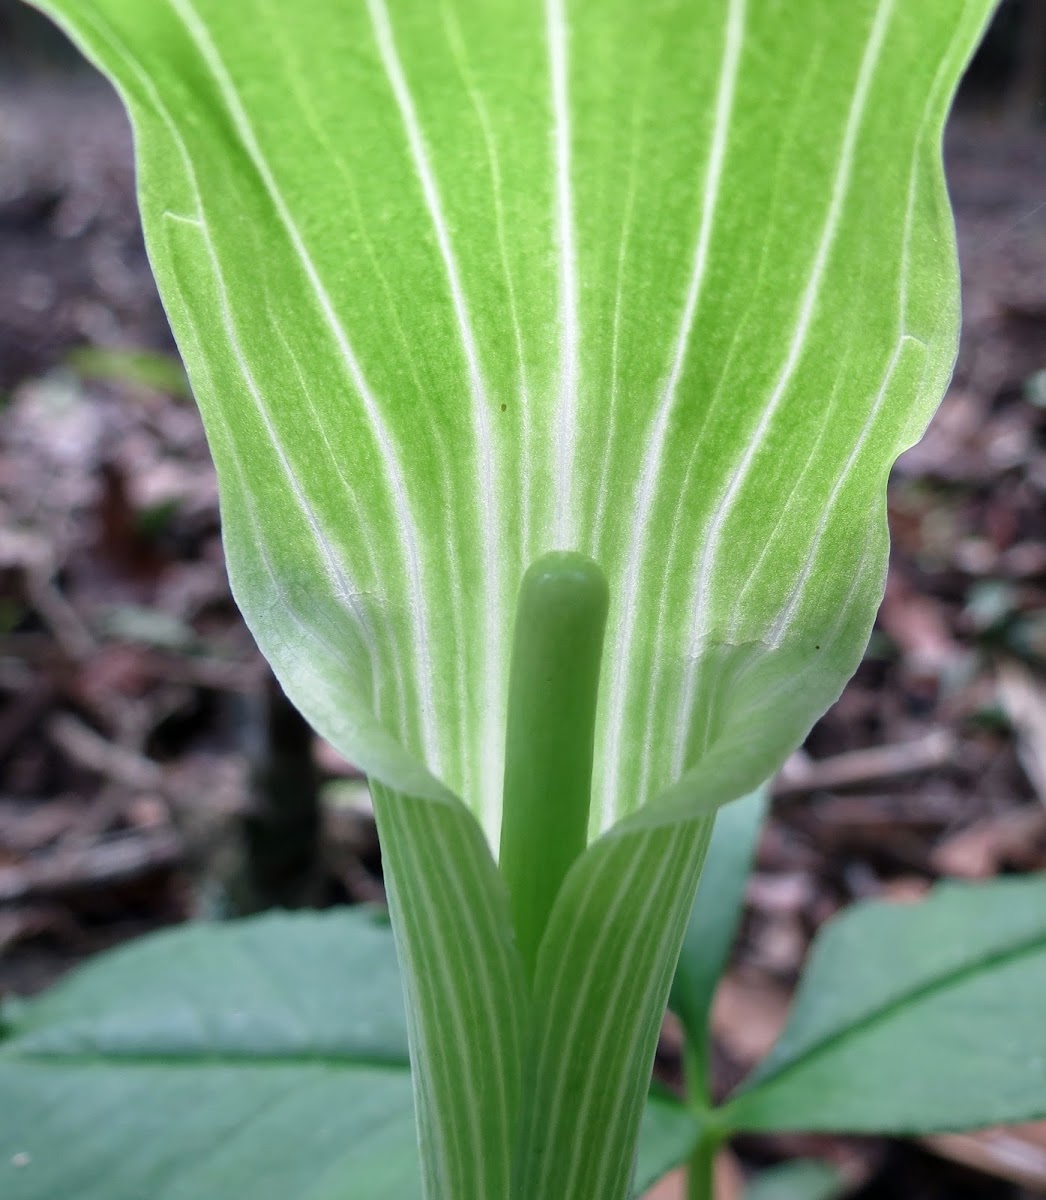 Jack-in-the pulpit